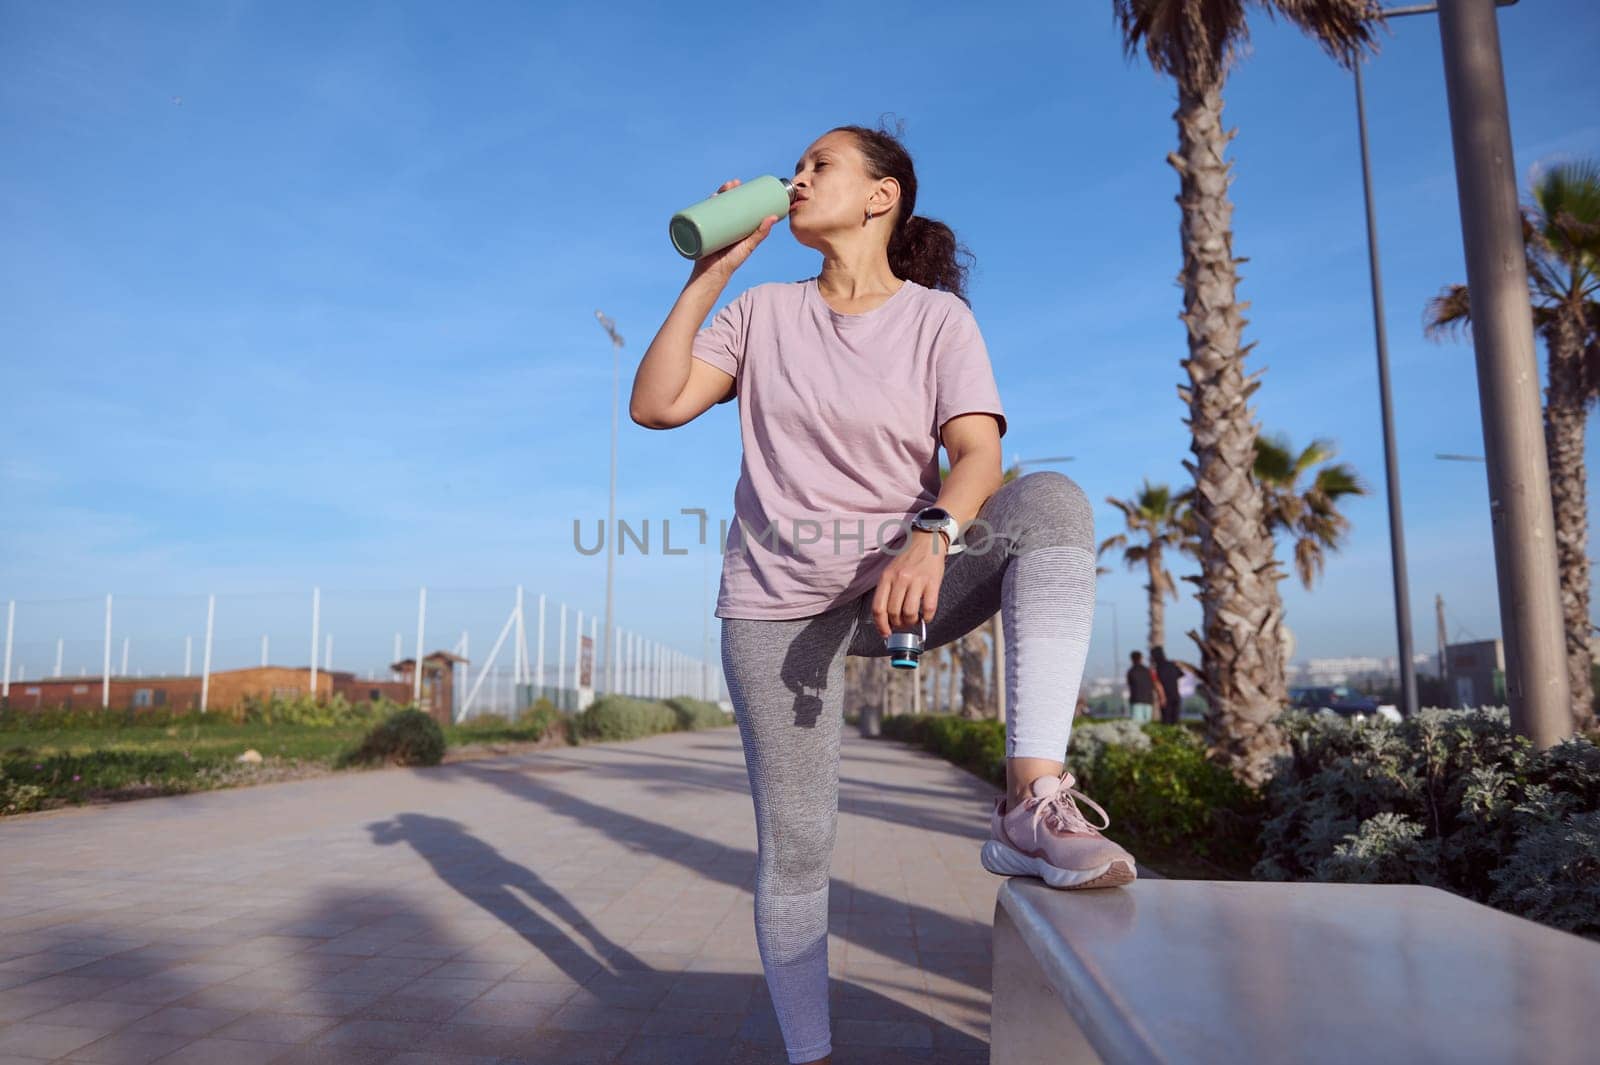 Attractive sporty girl taking break after outdoor workout or morning jog, standing by a stone bench and drinking water by artgf